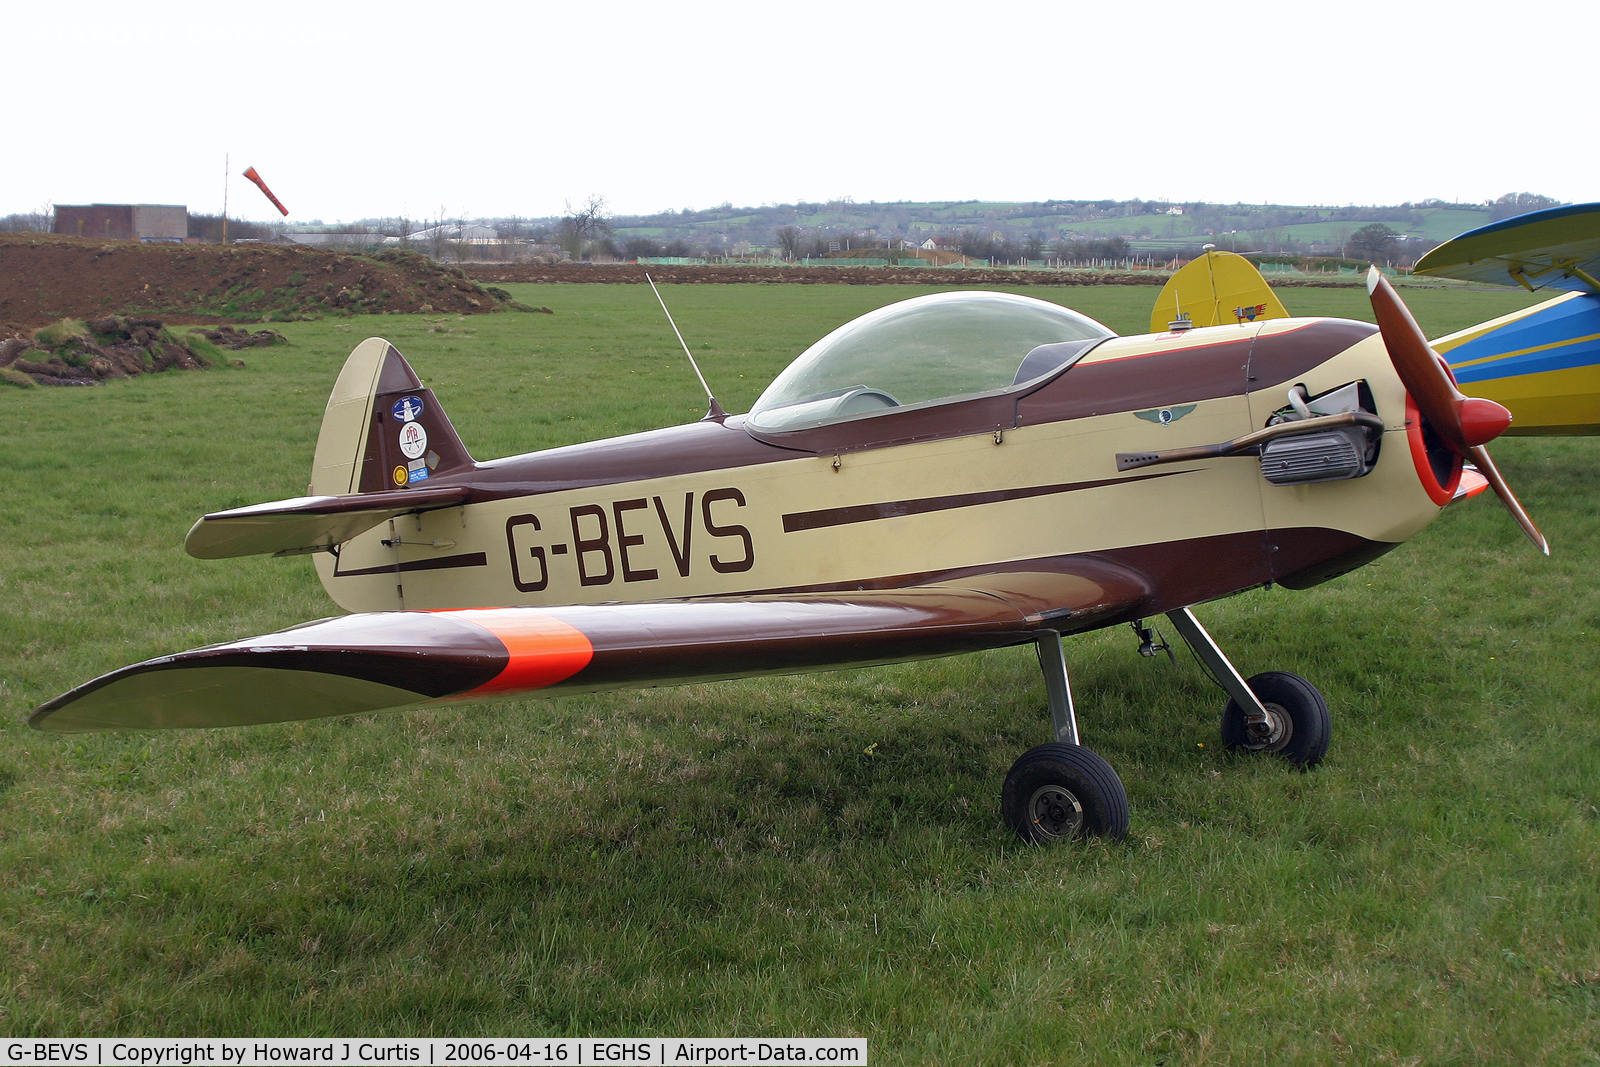 G-BEVS, 1978 Taylor Monoplane C/N PFA 1429, Privately owned, at the PFA fly-in here.